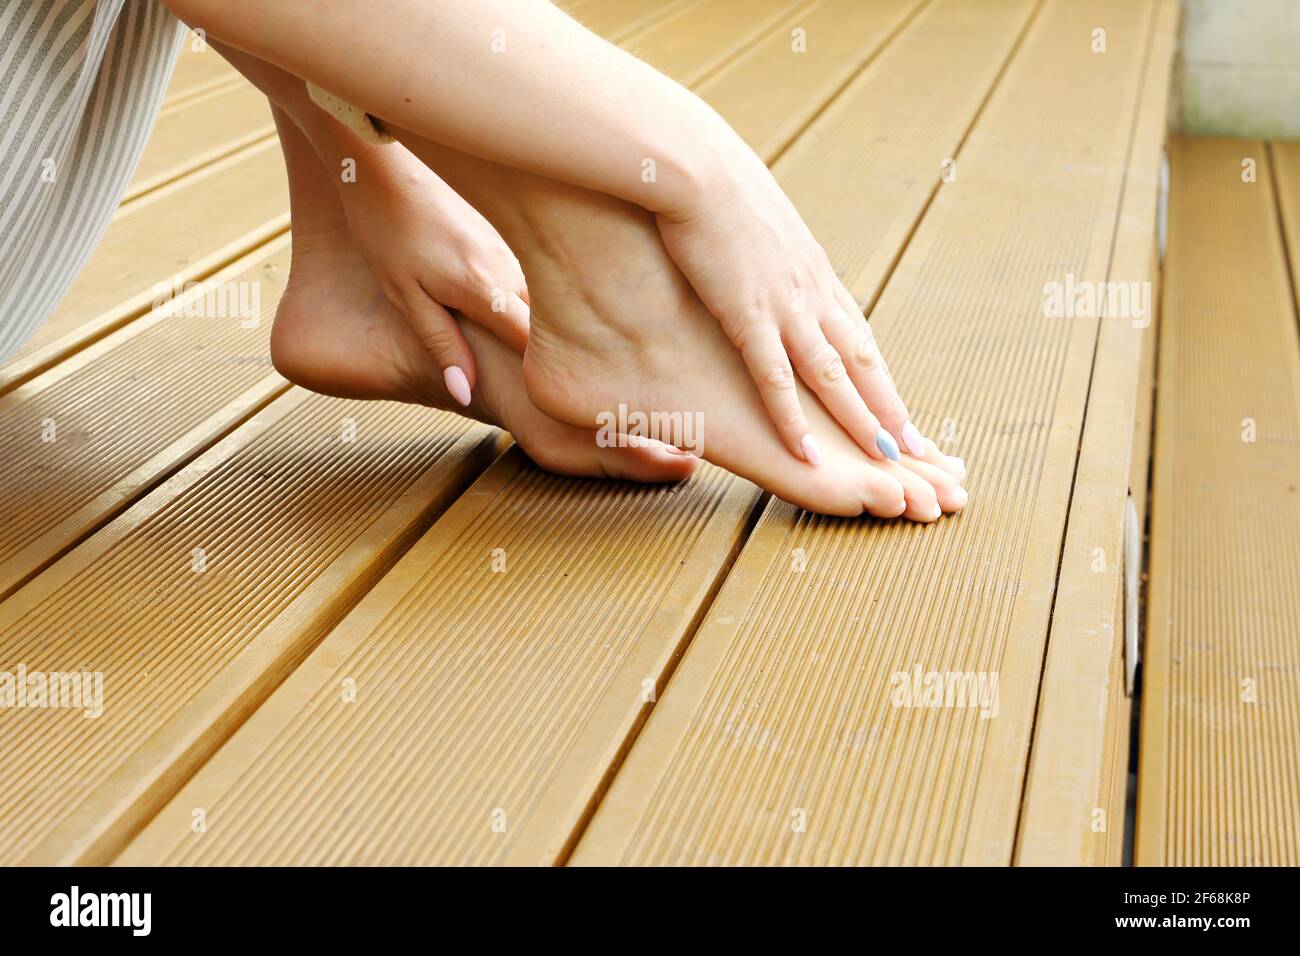 Bare feet. A woman is standing barefoot on the wooden floor. Stock Photo